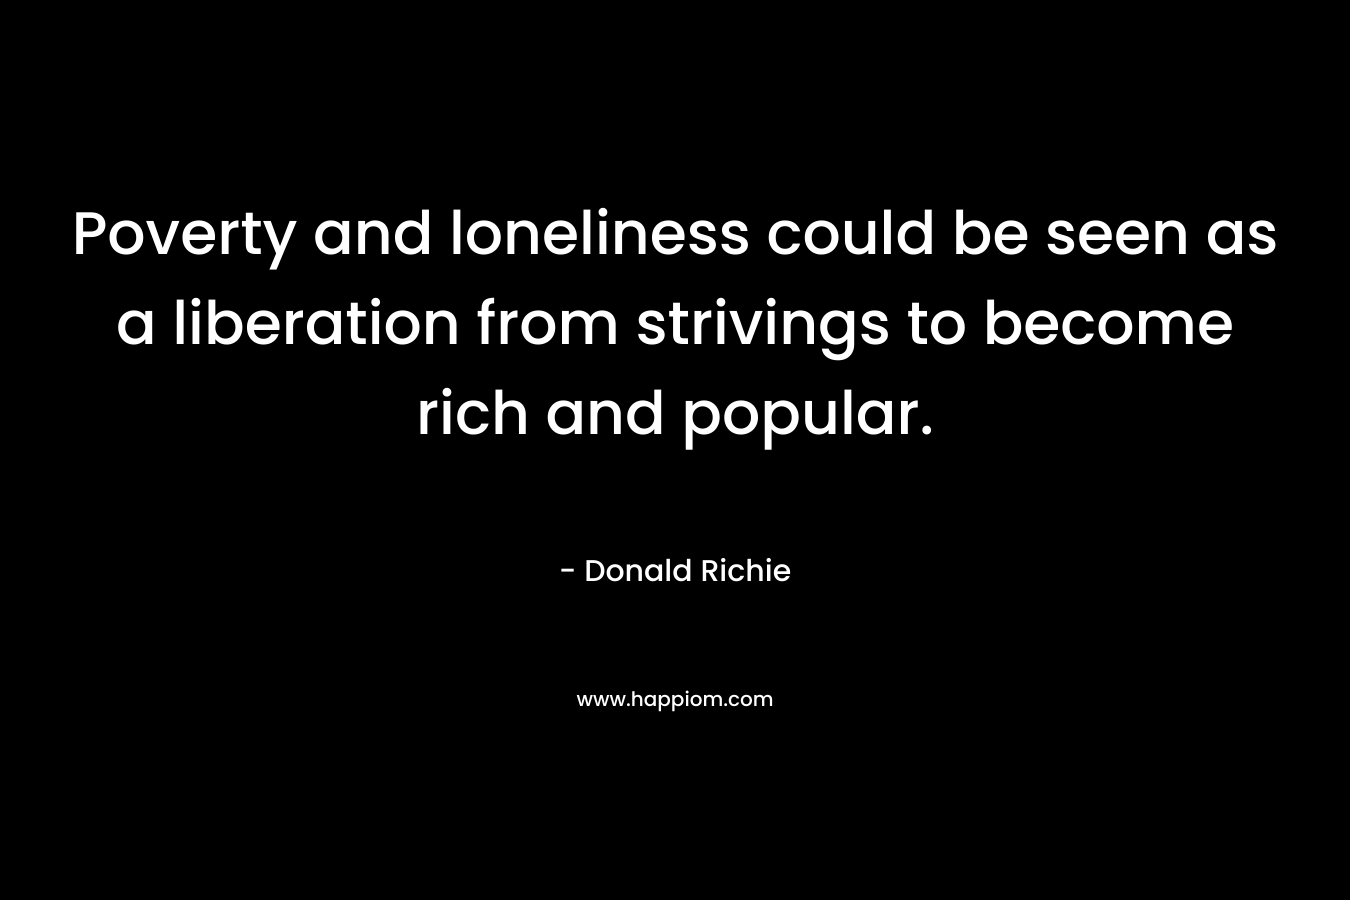 Poverty and loneliness could be seen as a liberation from strivings to become rich and popular.